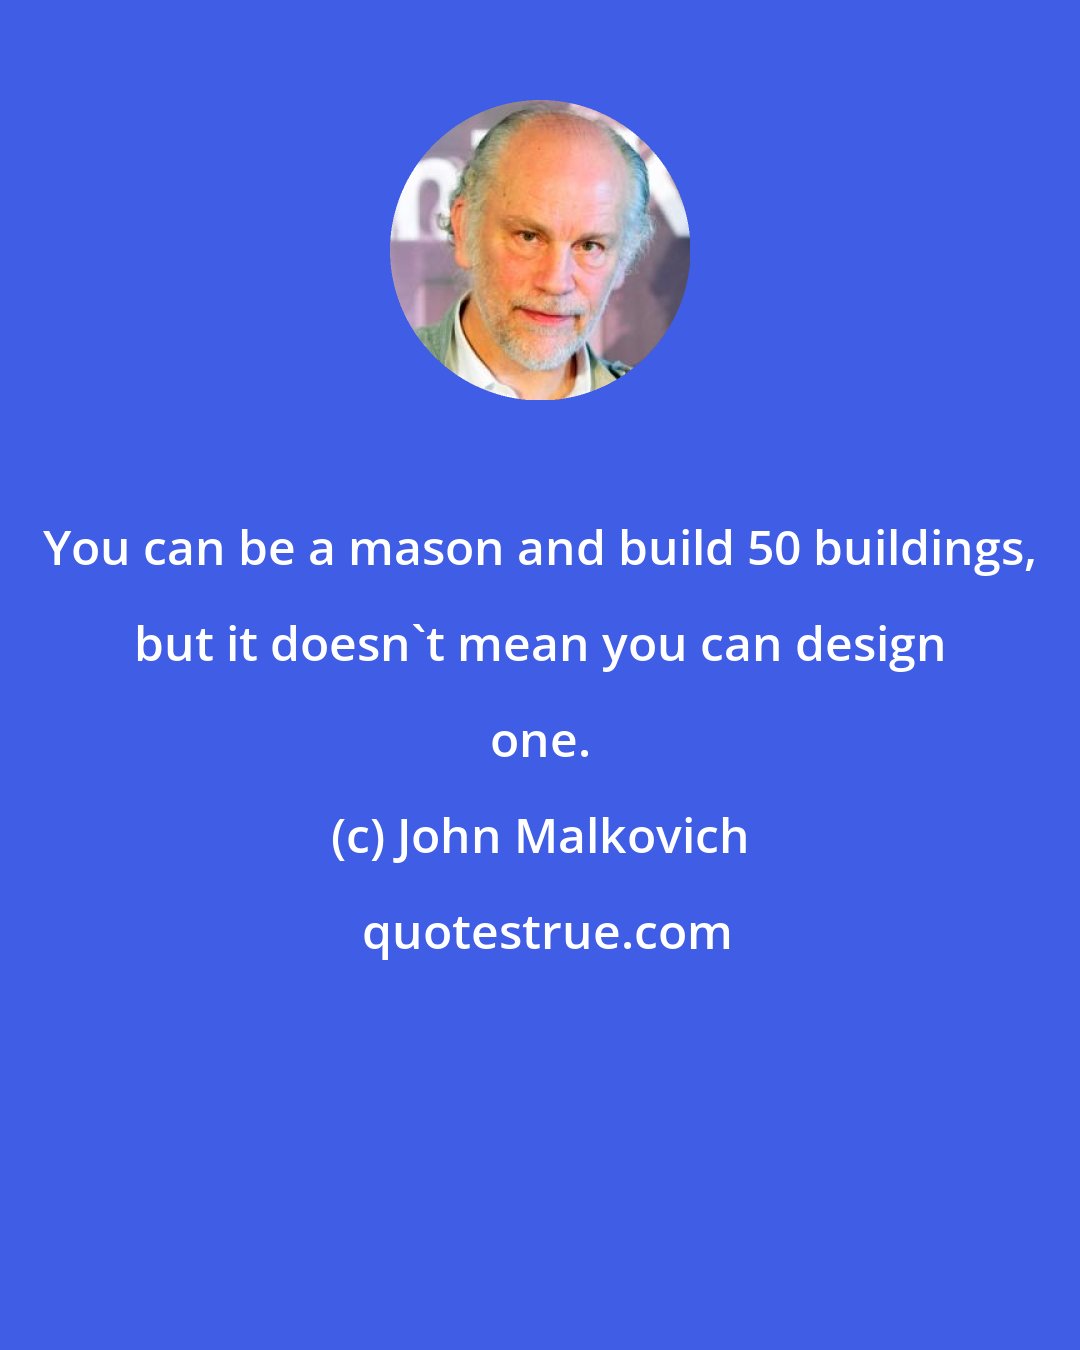 John Malkovich: You can be a mason and build 50 buildings, but it doesn't mean you can design one.